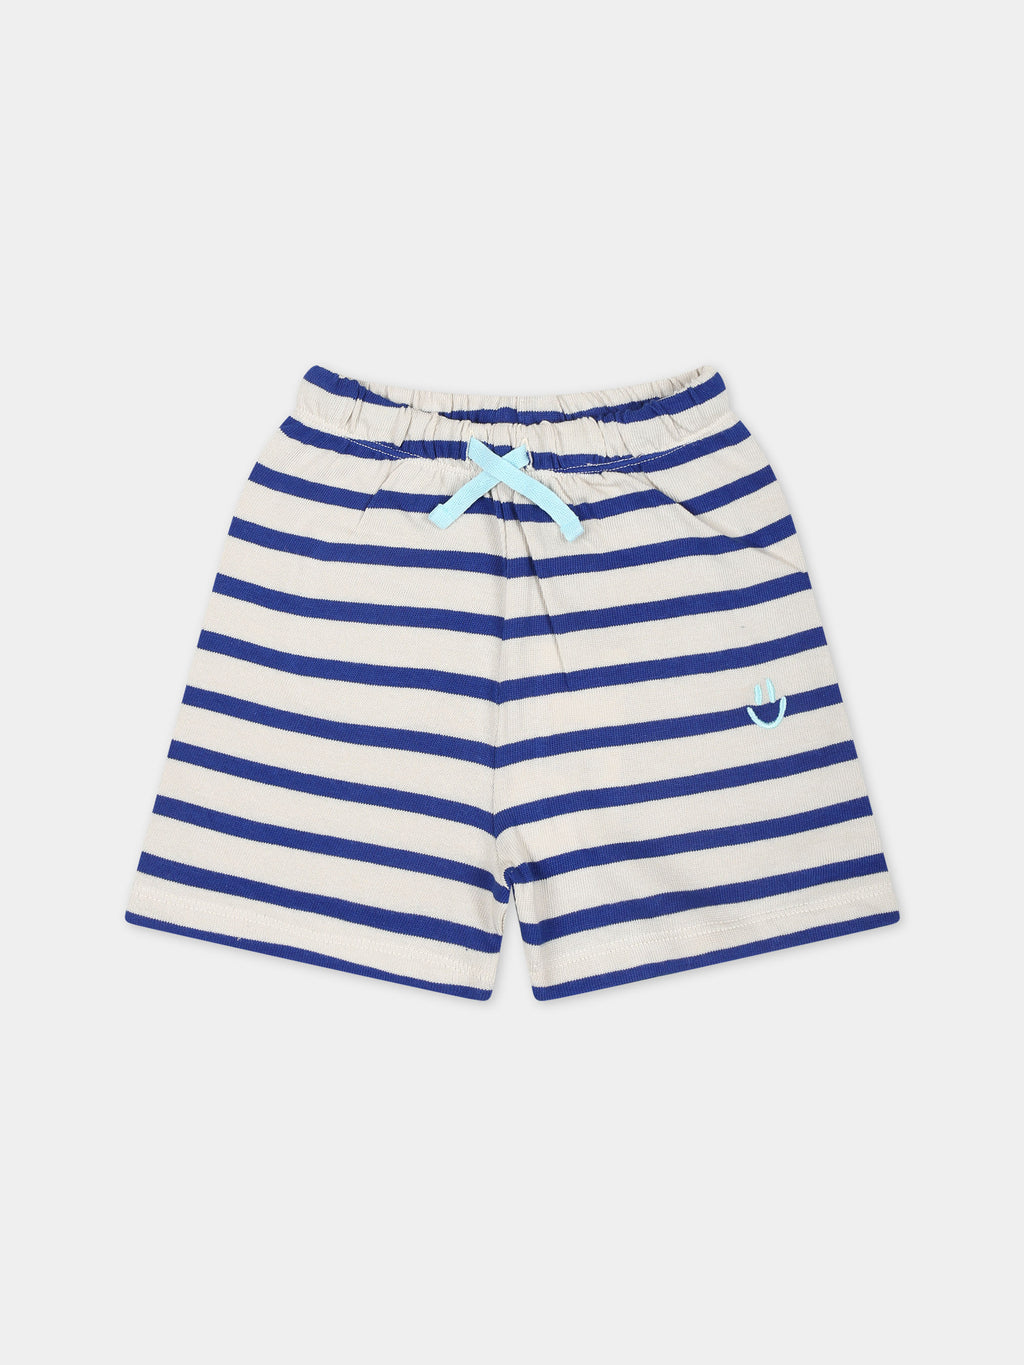 Ivory shorts for babykids with smiley